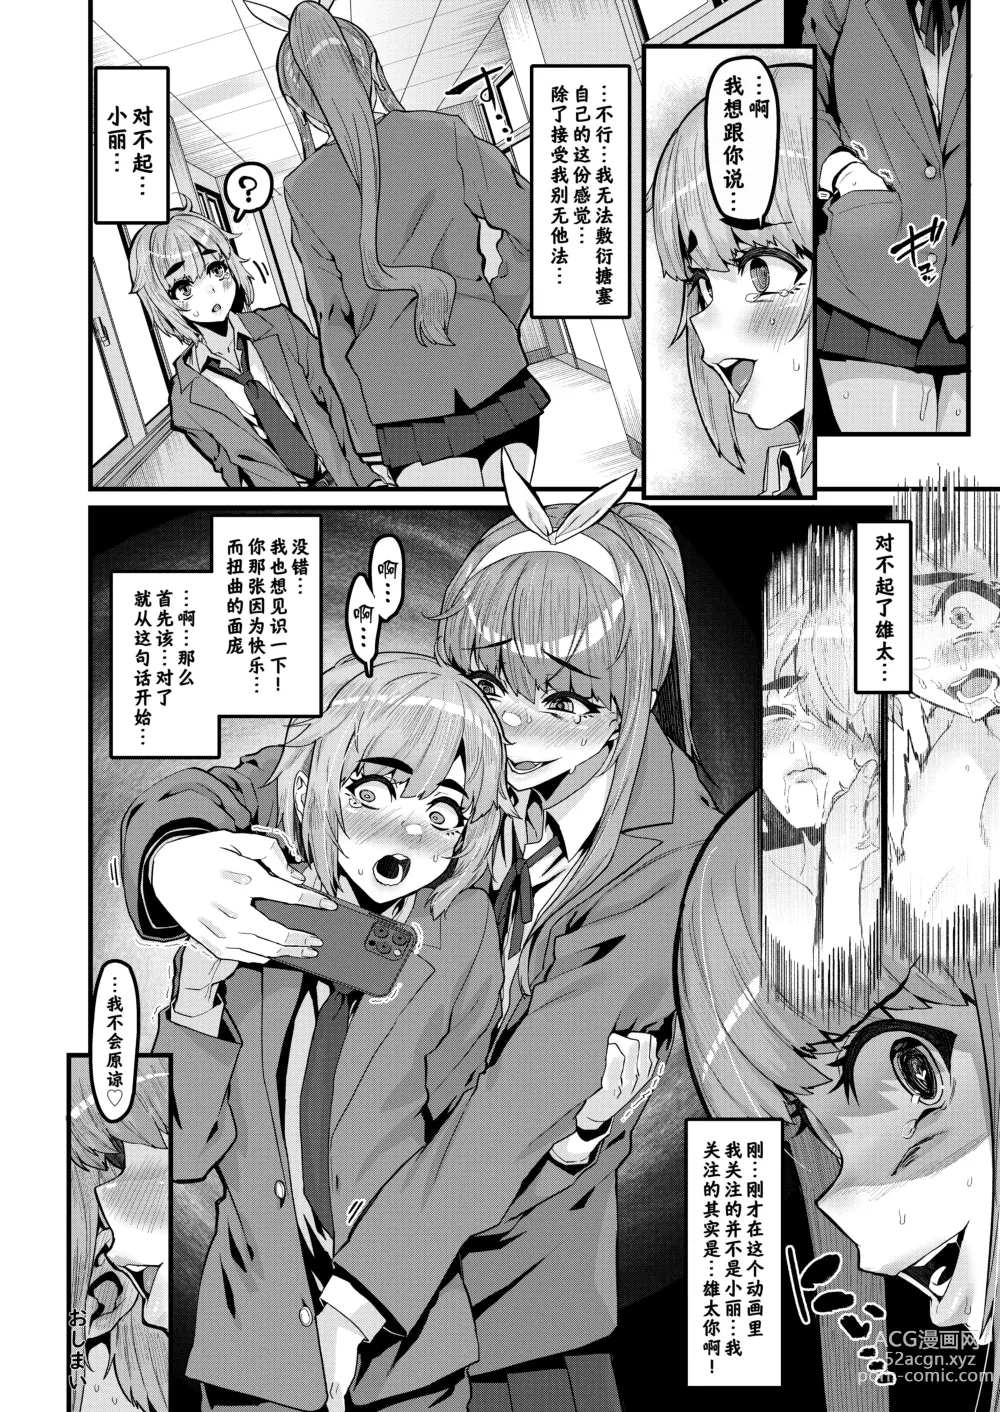 Page 27 of doujinshi 青梅竹马到此为止